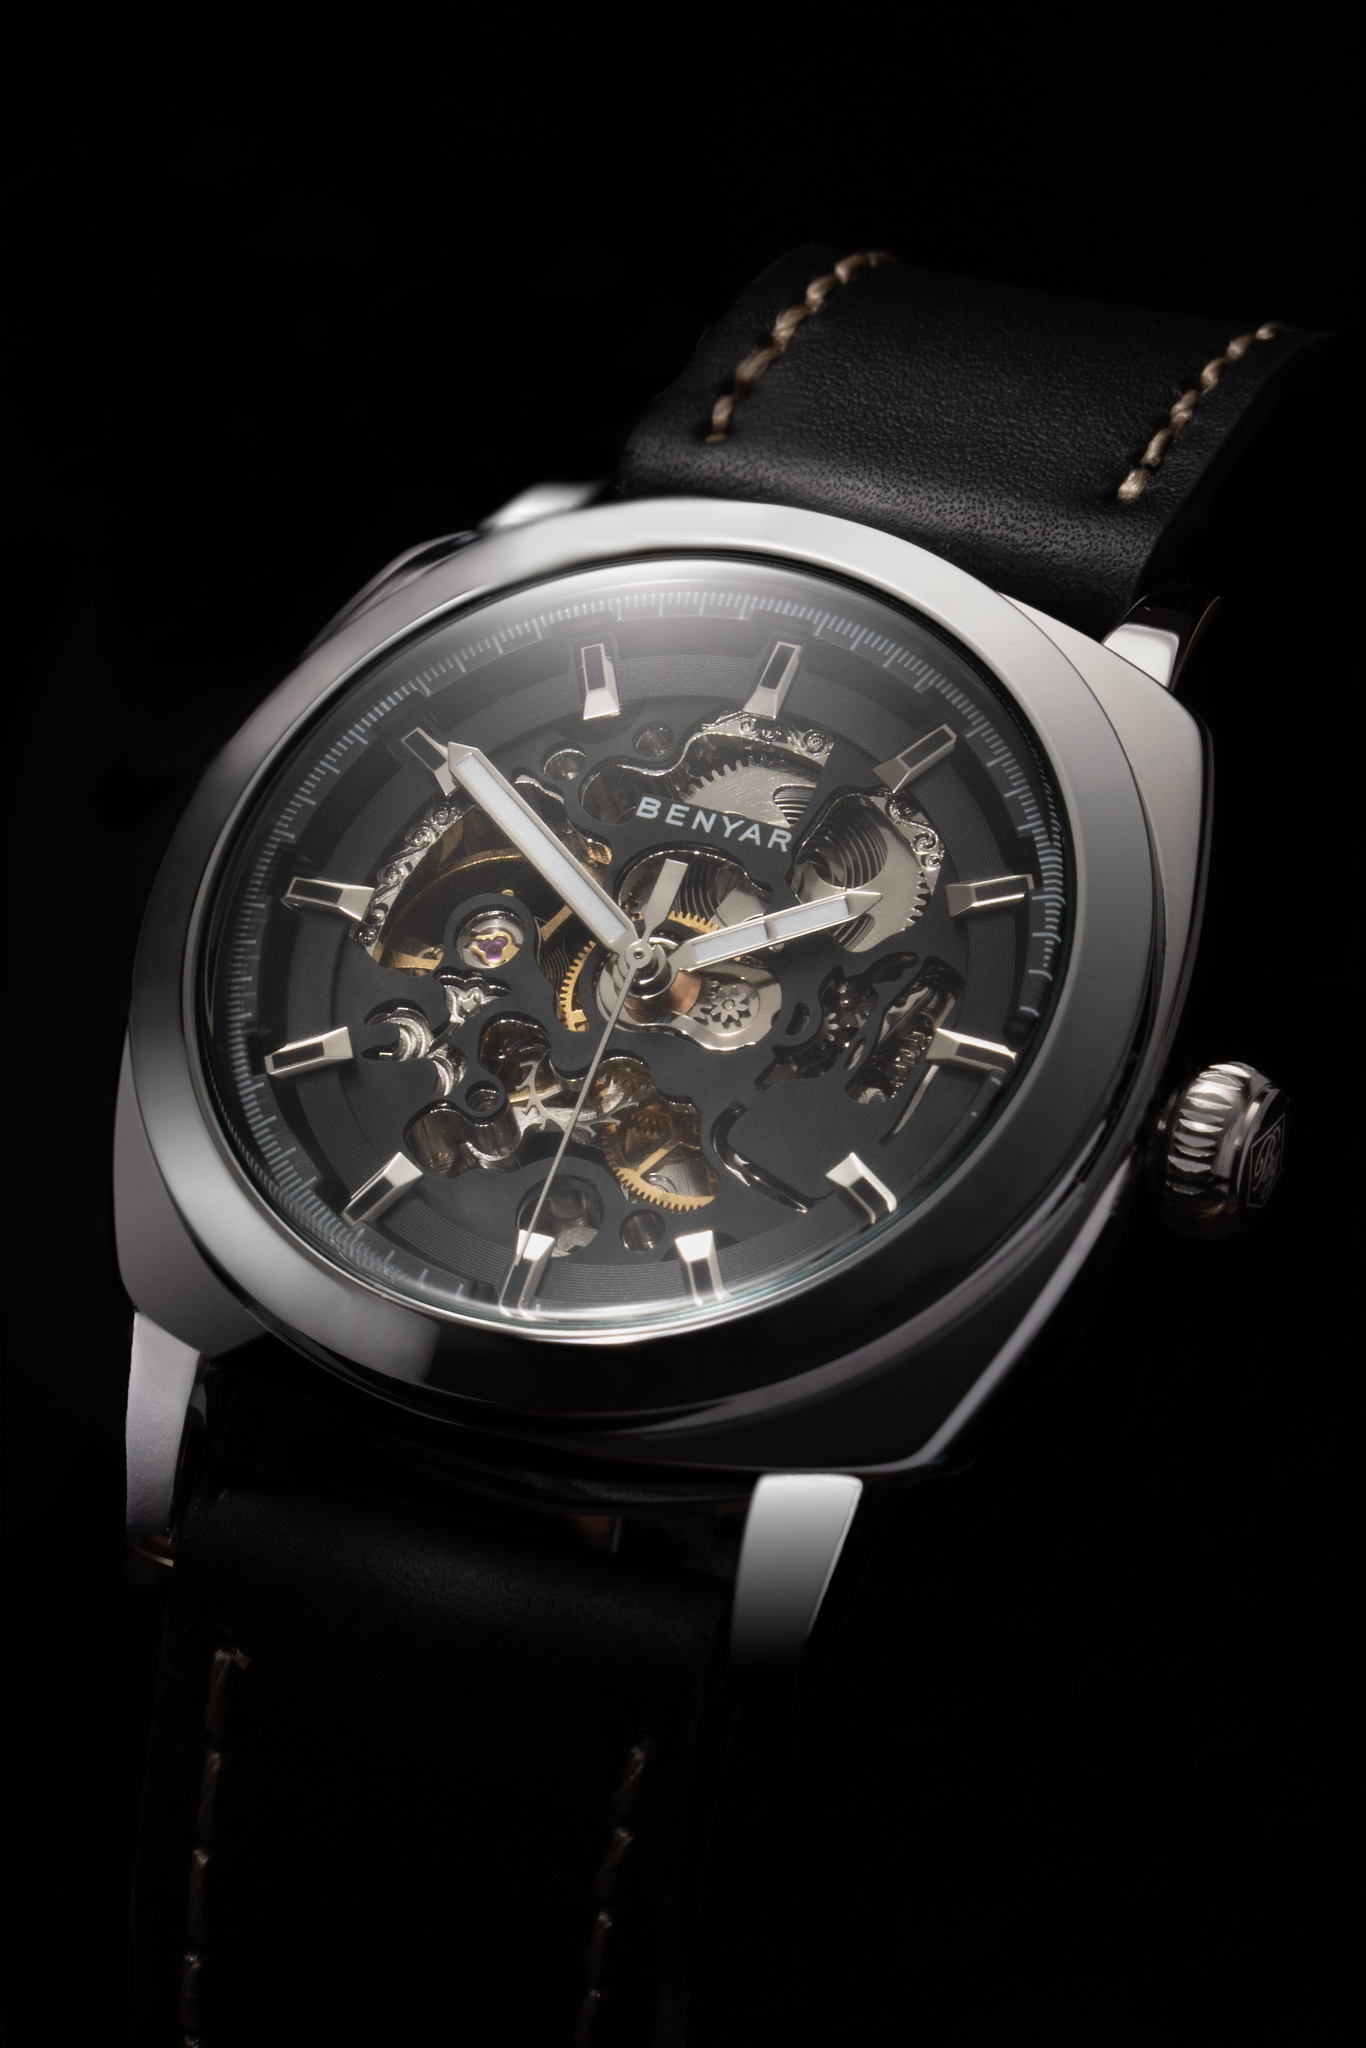 Close-up of a BENYAR skeleton watch on a black background. The watch has a gold-colored case and a black leather strap